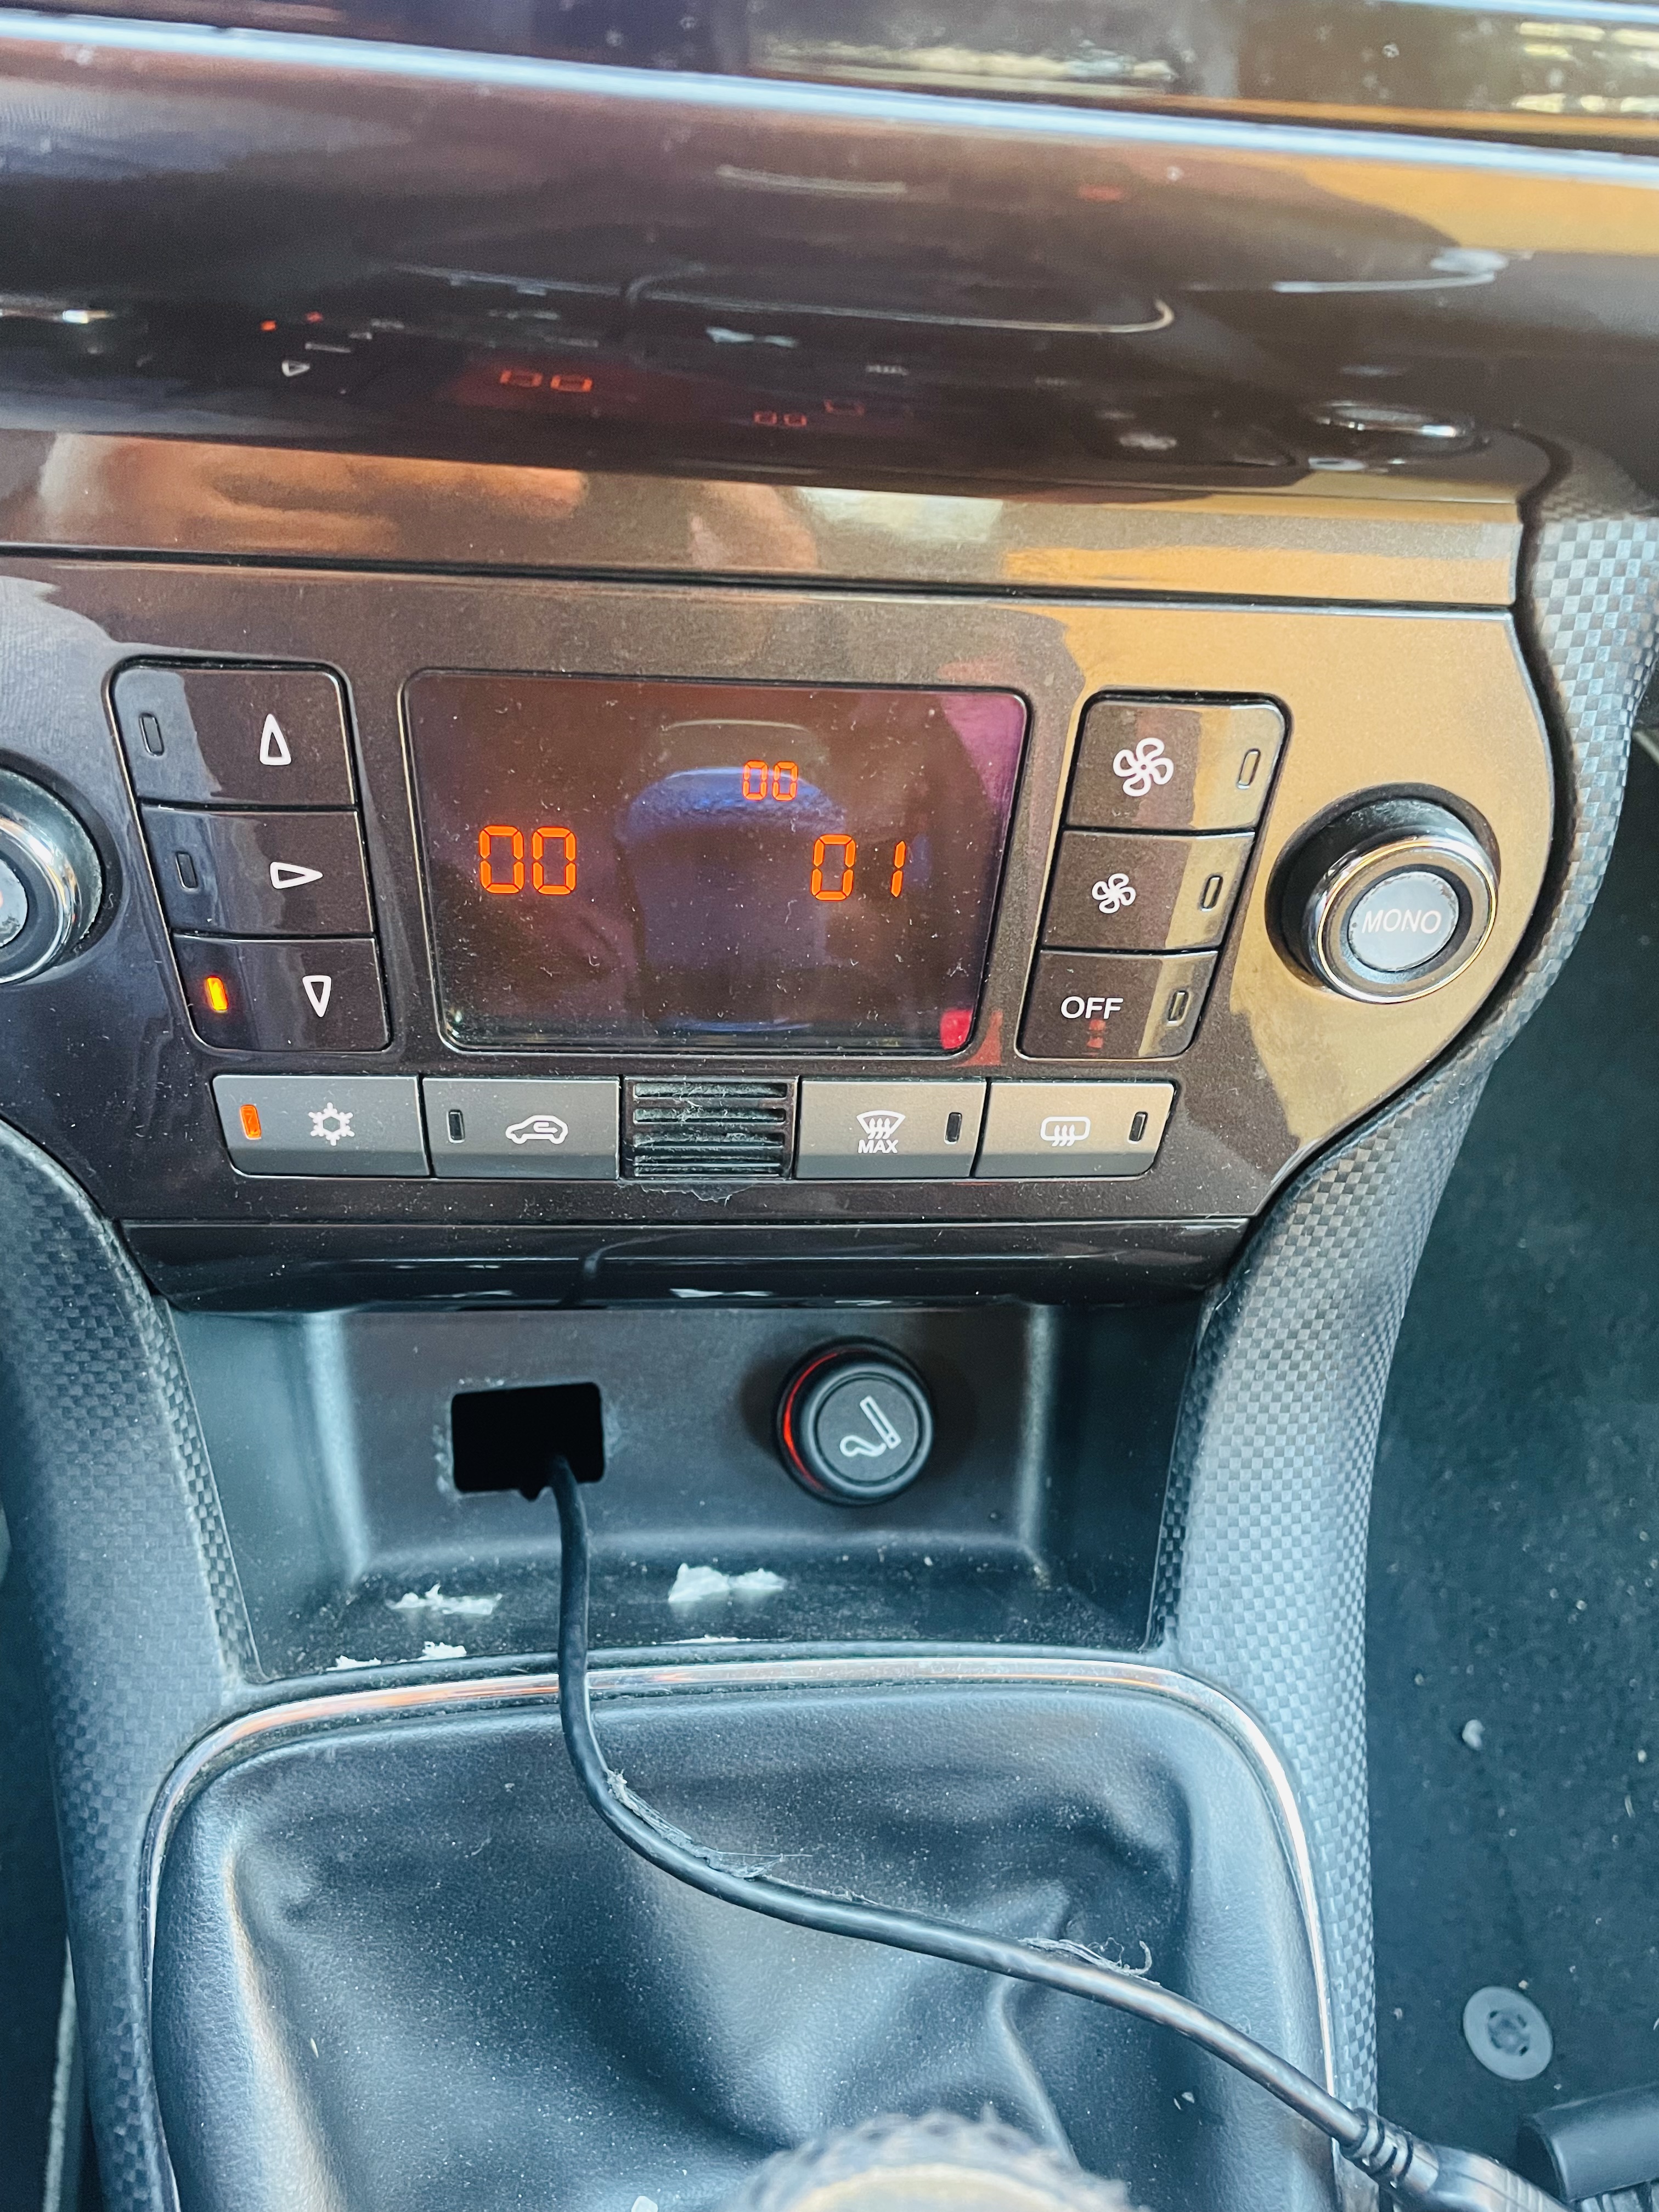 Removal of panel between radio and climate control, FIAT Bravo 2 (2007+)